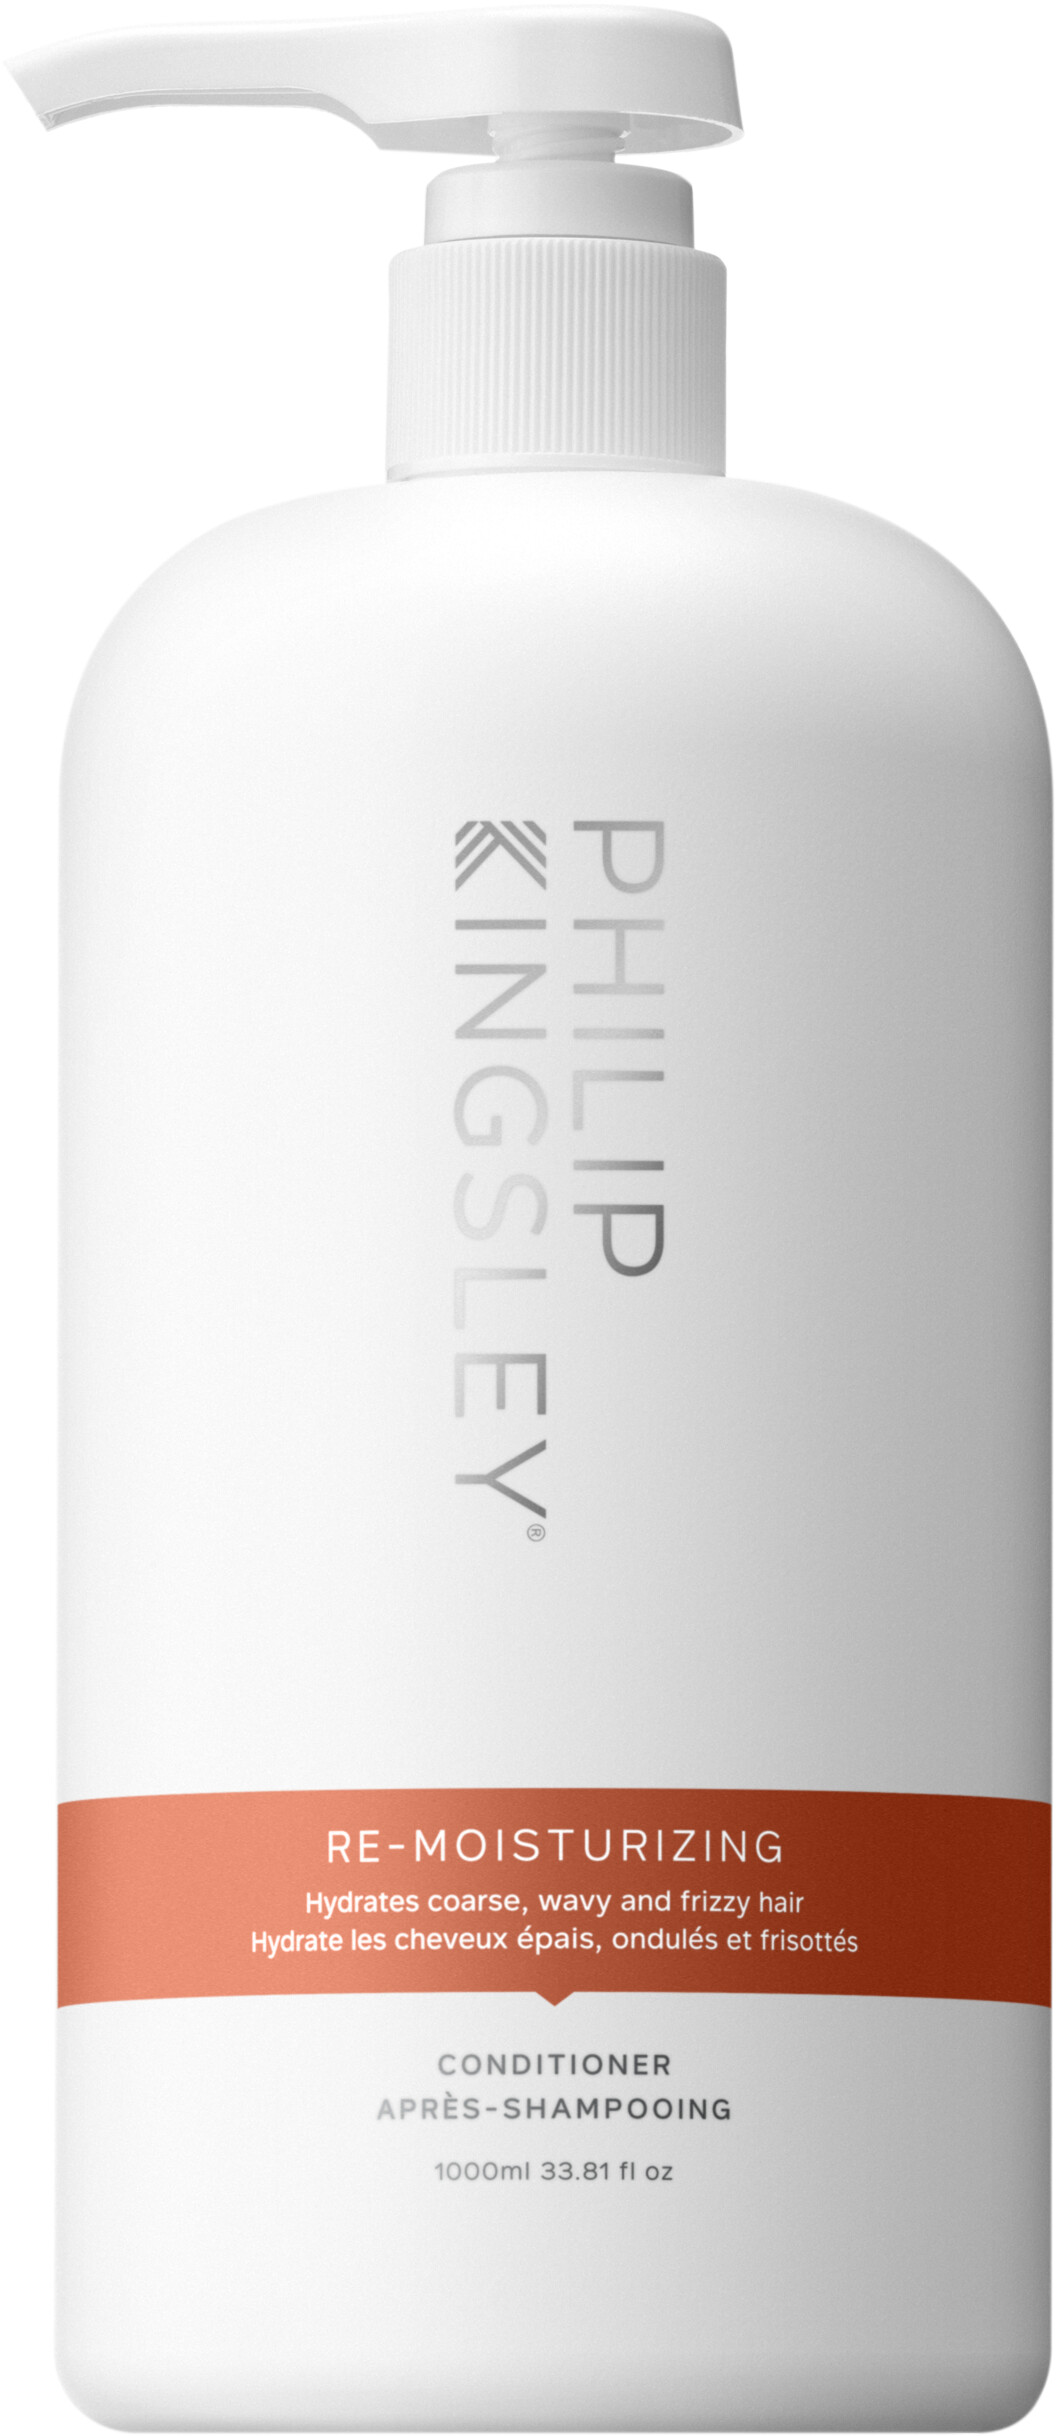 Philip Kingsley Re-Moisturizing Smoothing Conditioner 1 litre